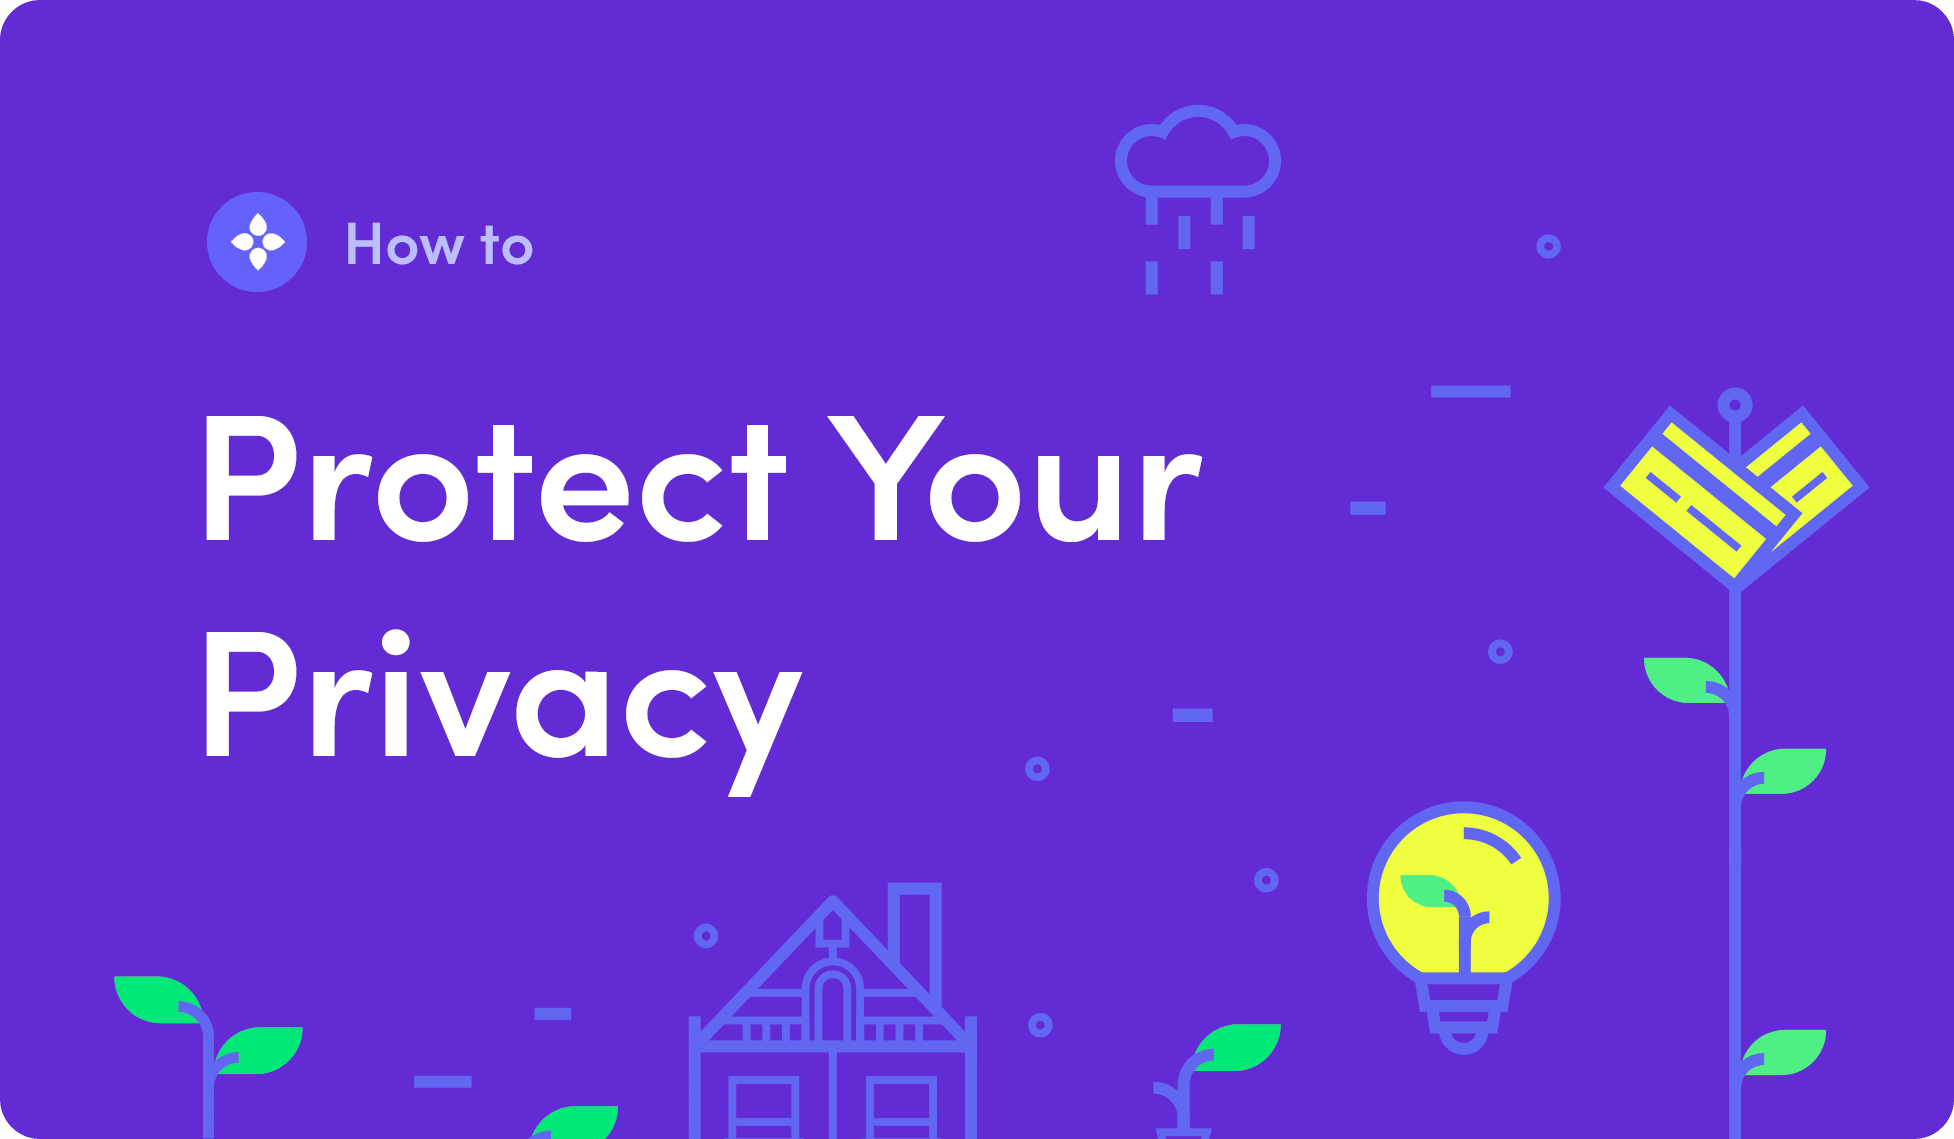 How to protect your privacy